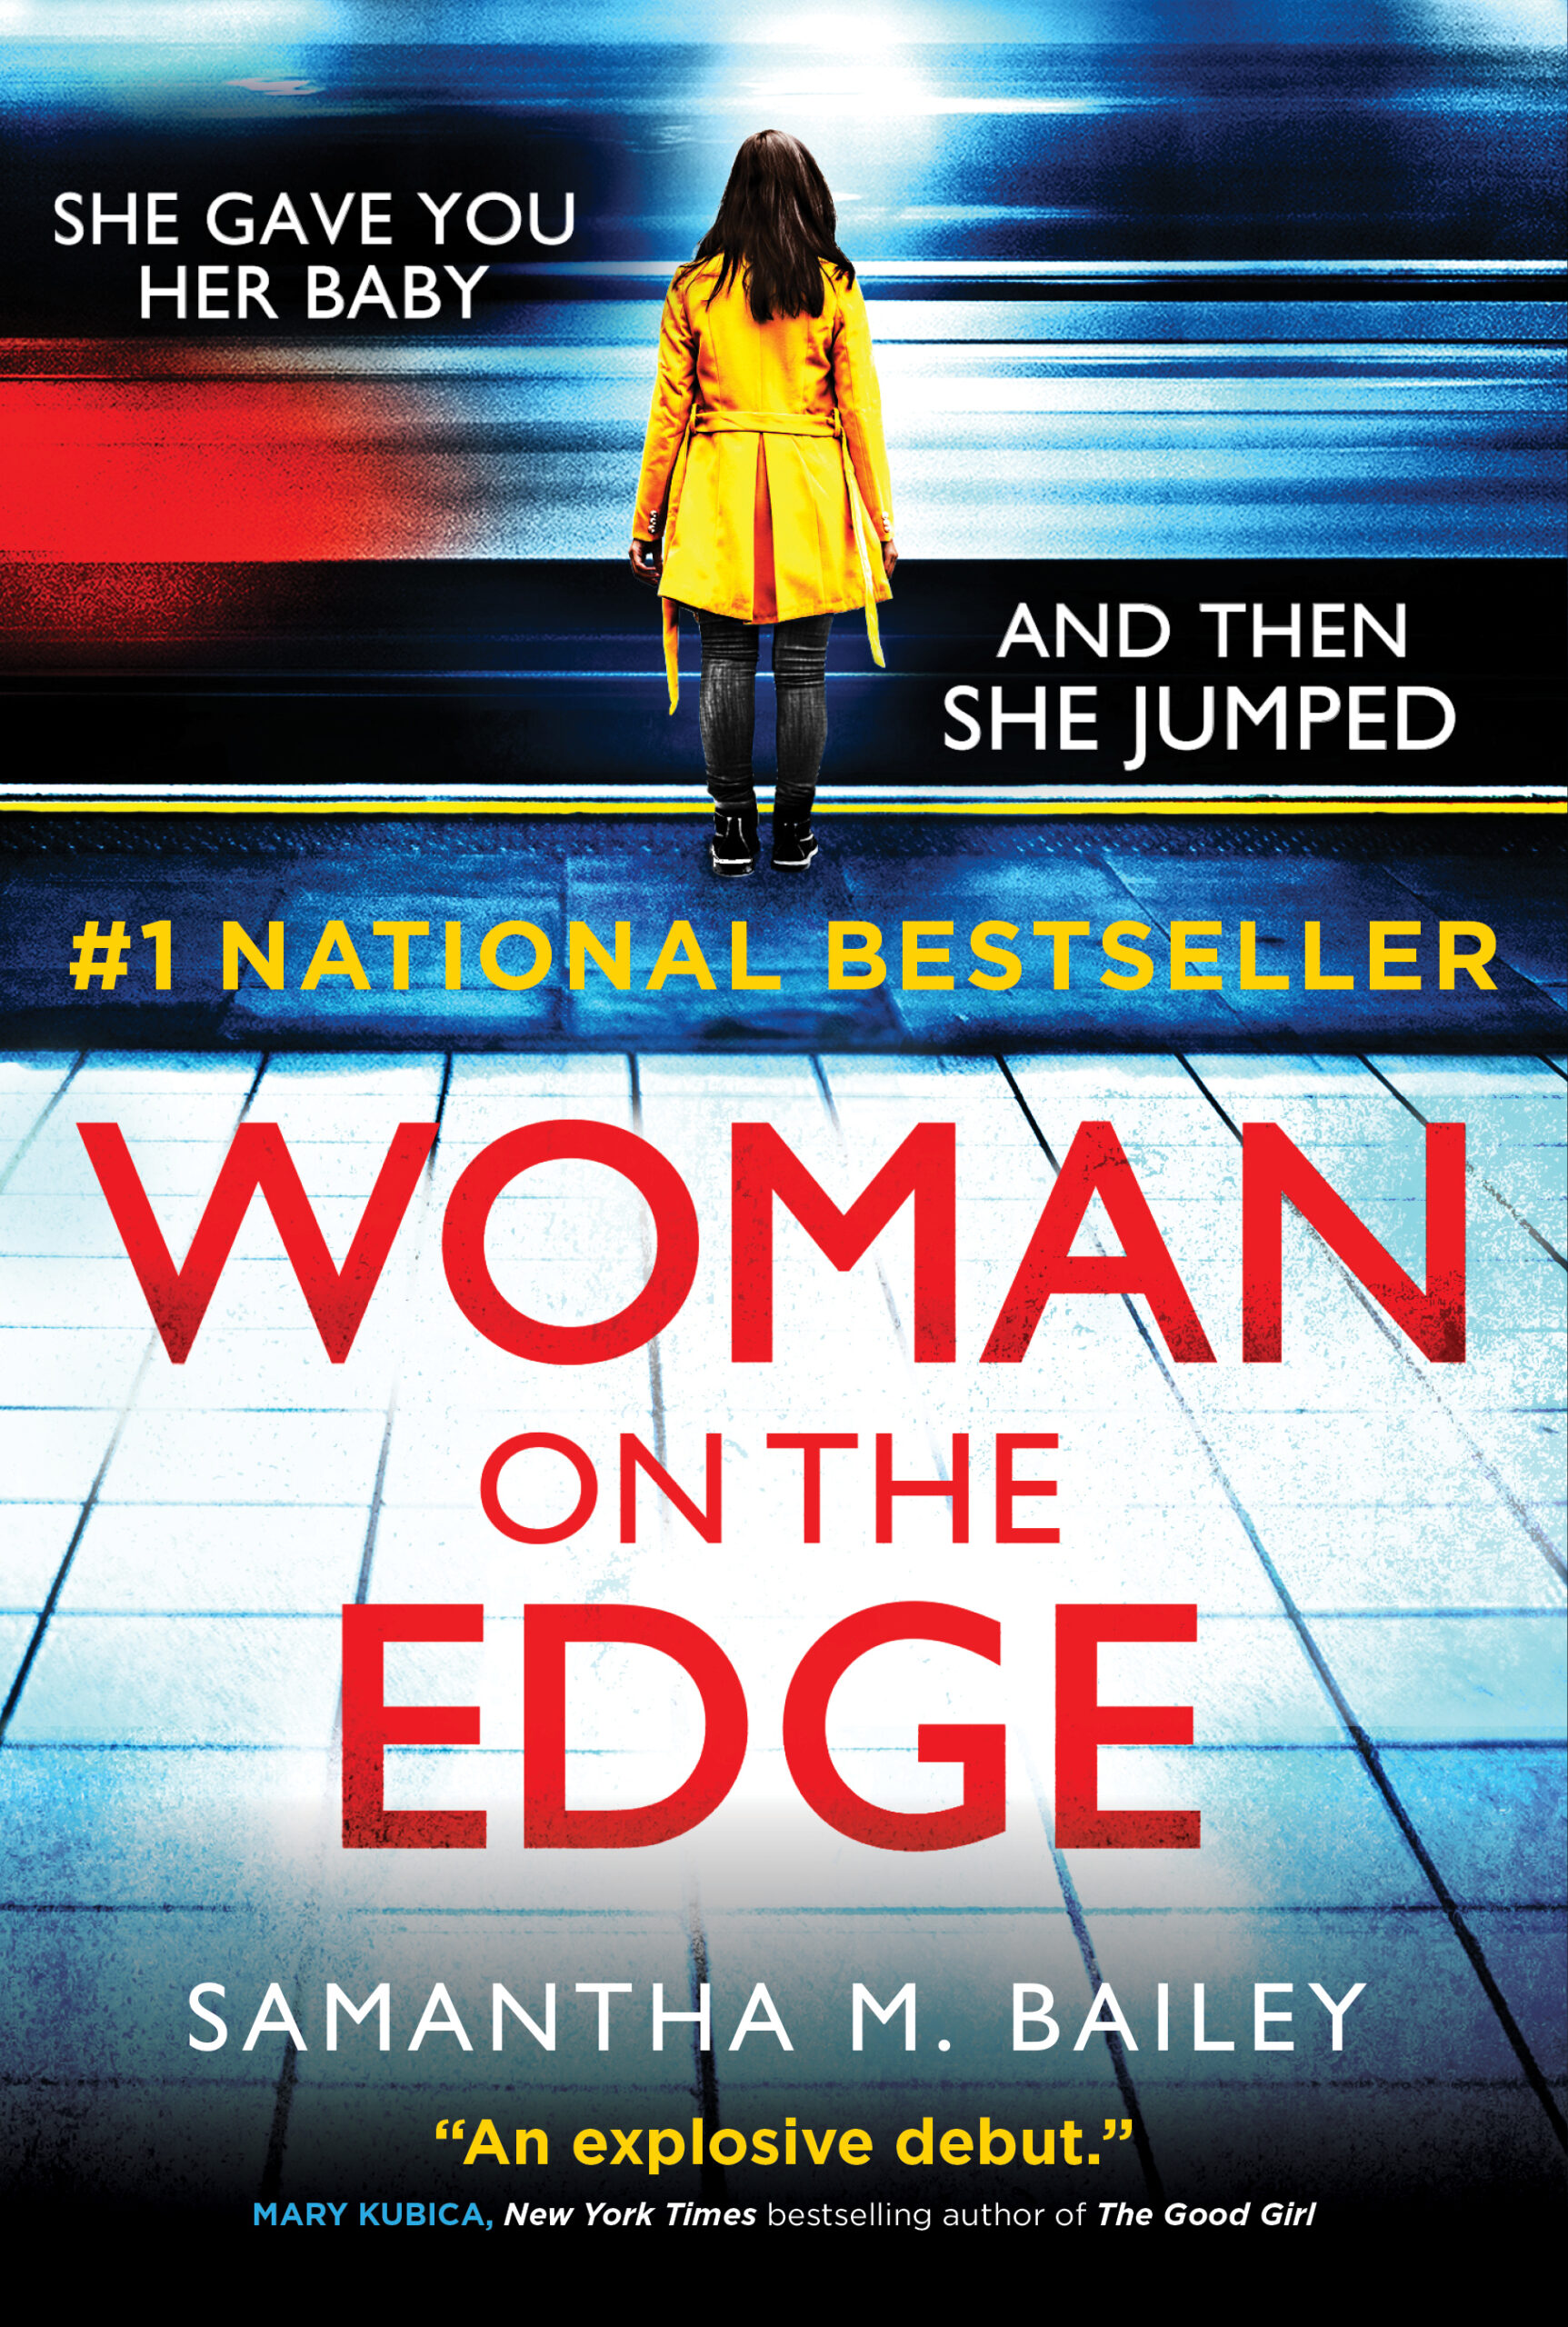 Bailey, Samantha M. - Woman on the Edge - BookCover